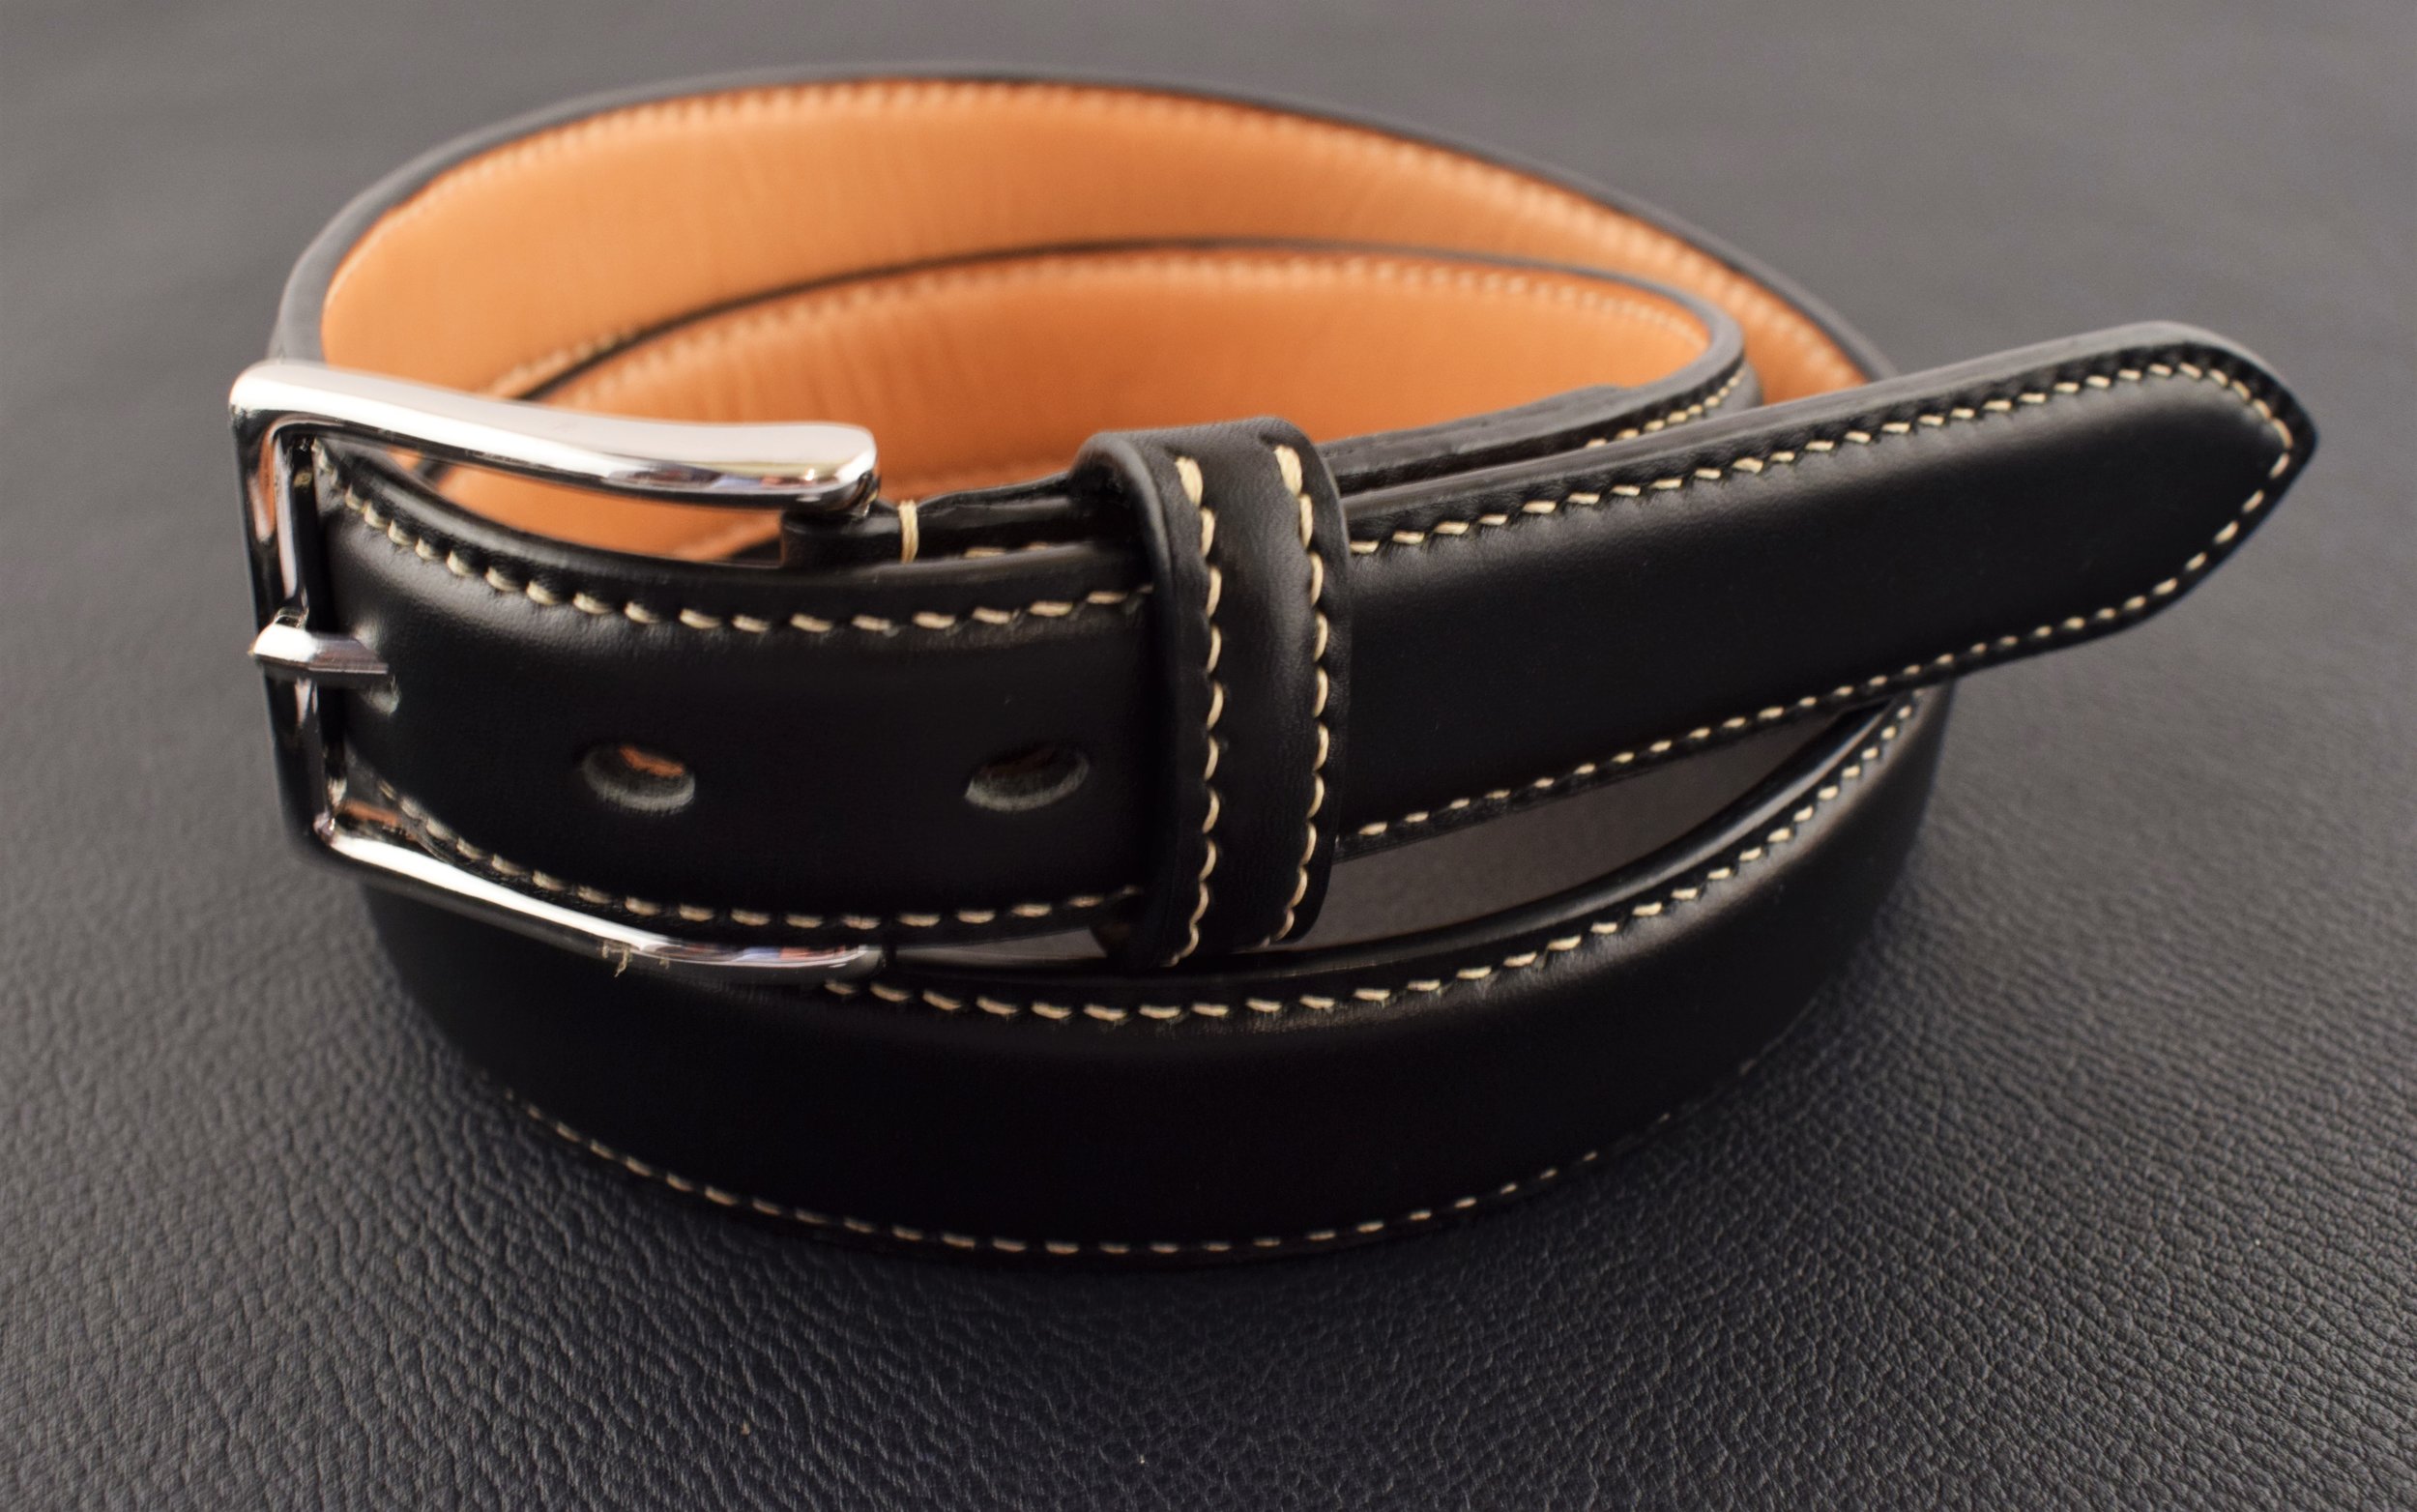 1 1/8" Black European Bridle with Padded and Stitched Keep ($215)